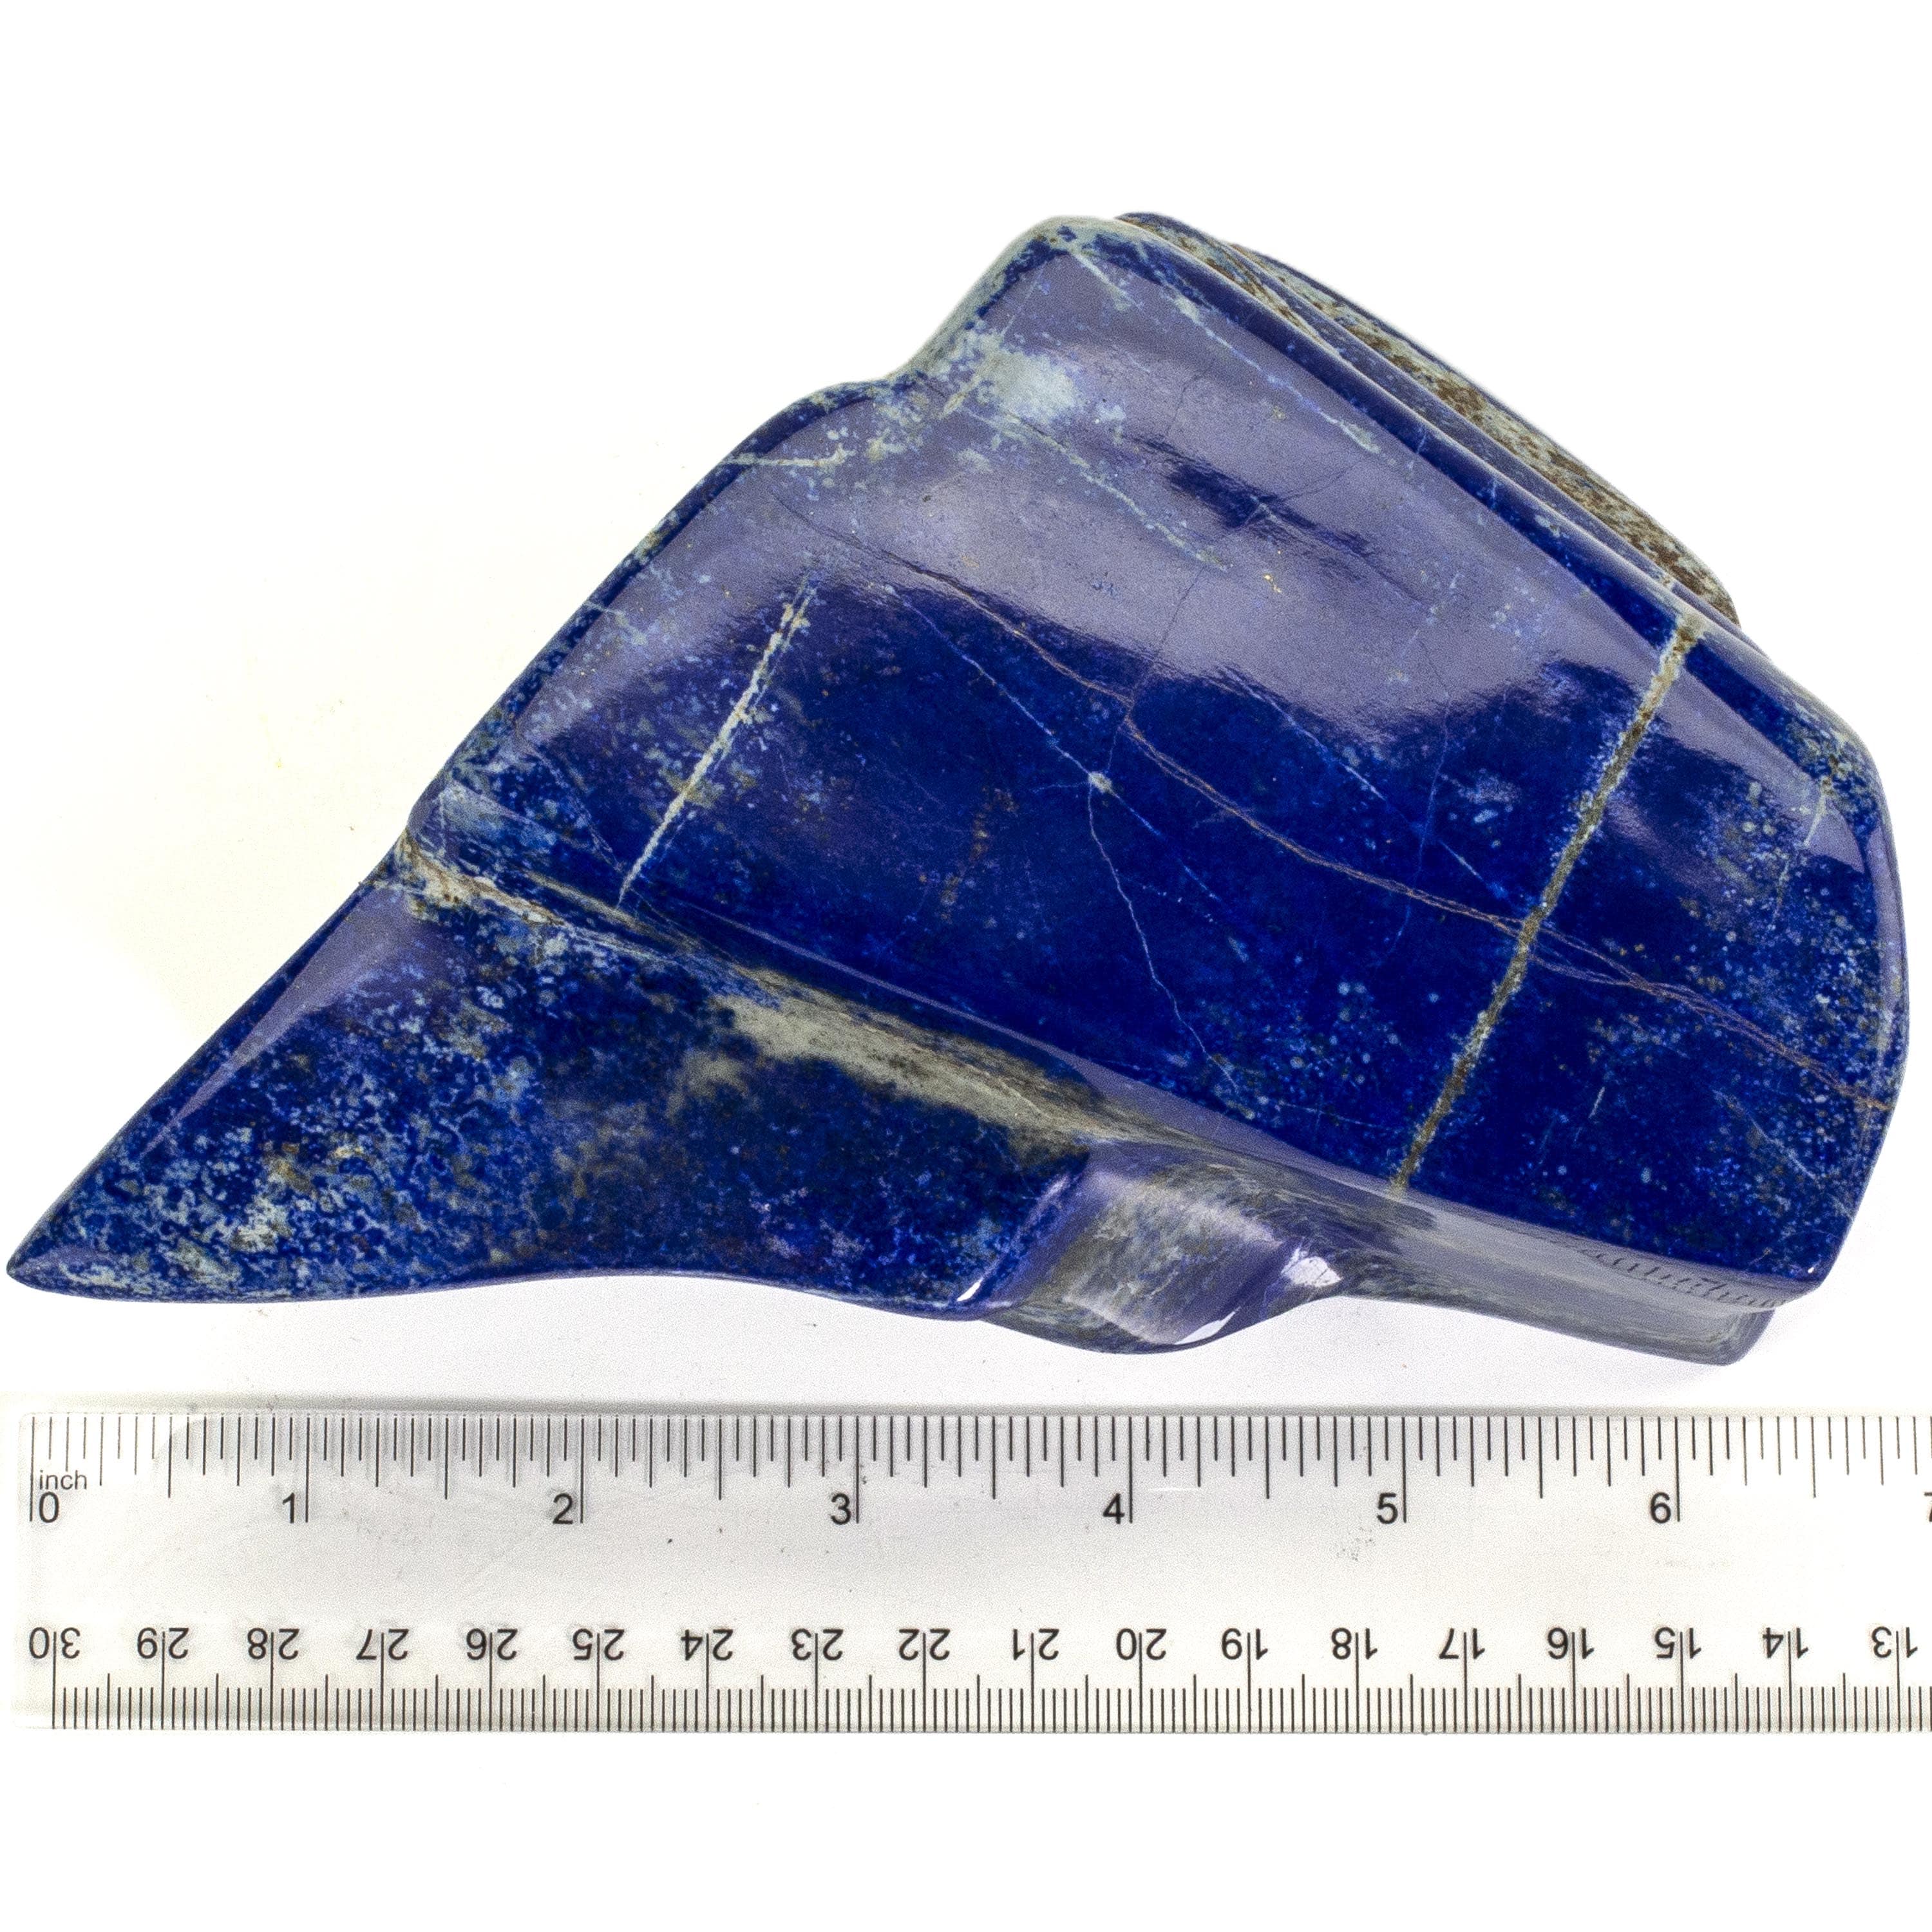 Kalifano Lapis Lapis Lazuil Freeform from Afghanistan - 1.8 kg / 4.1 lbs LP2000.002